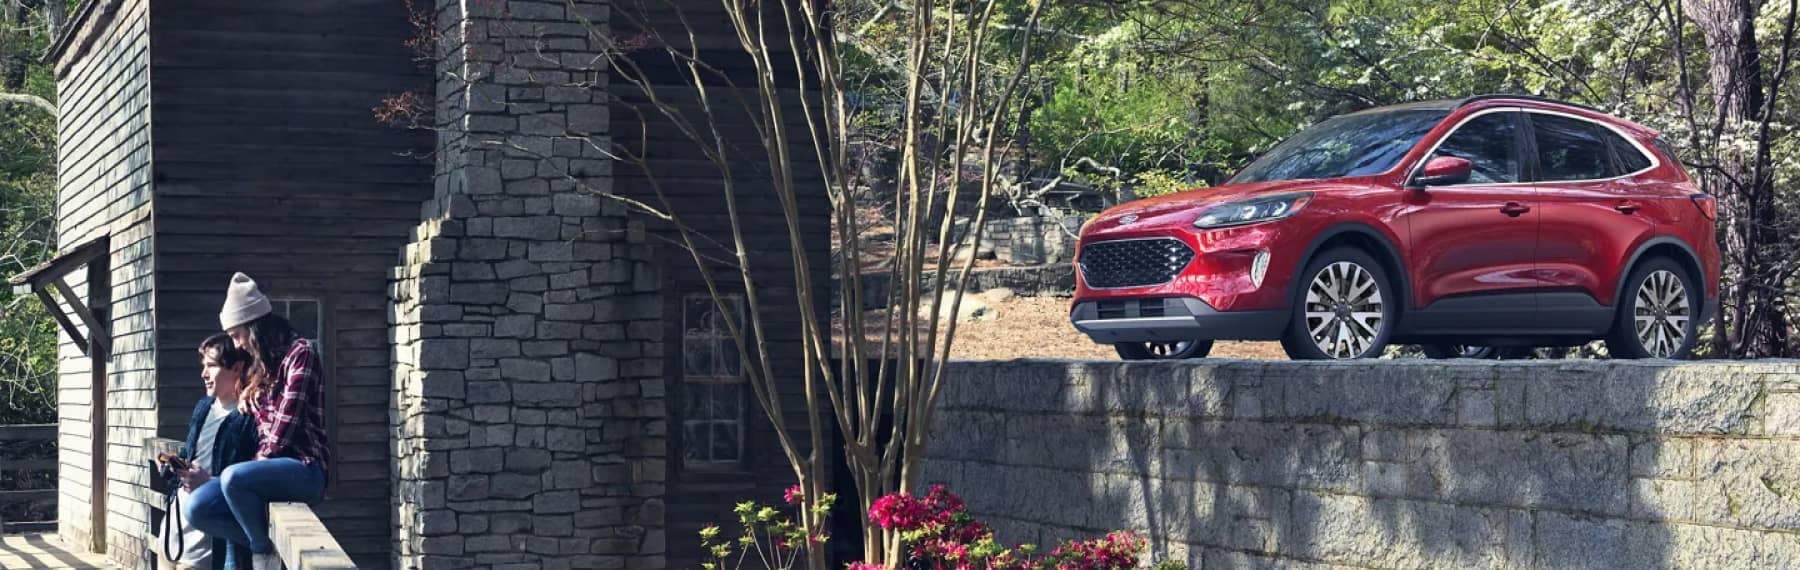 image of red ford suv parked